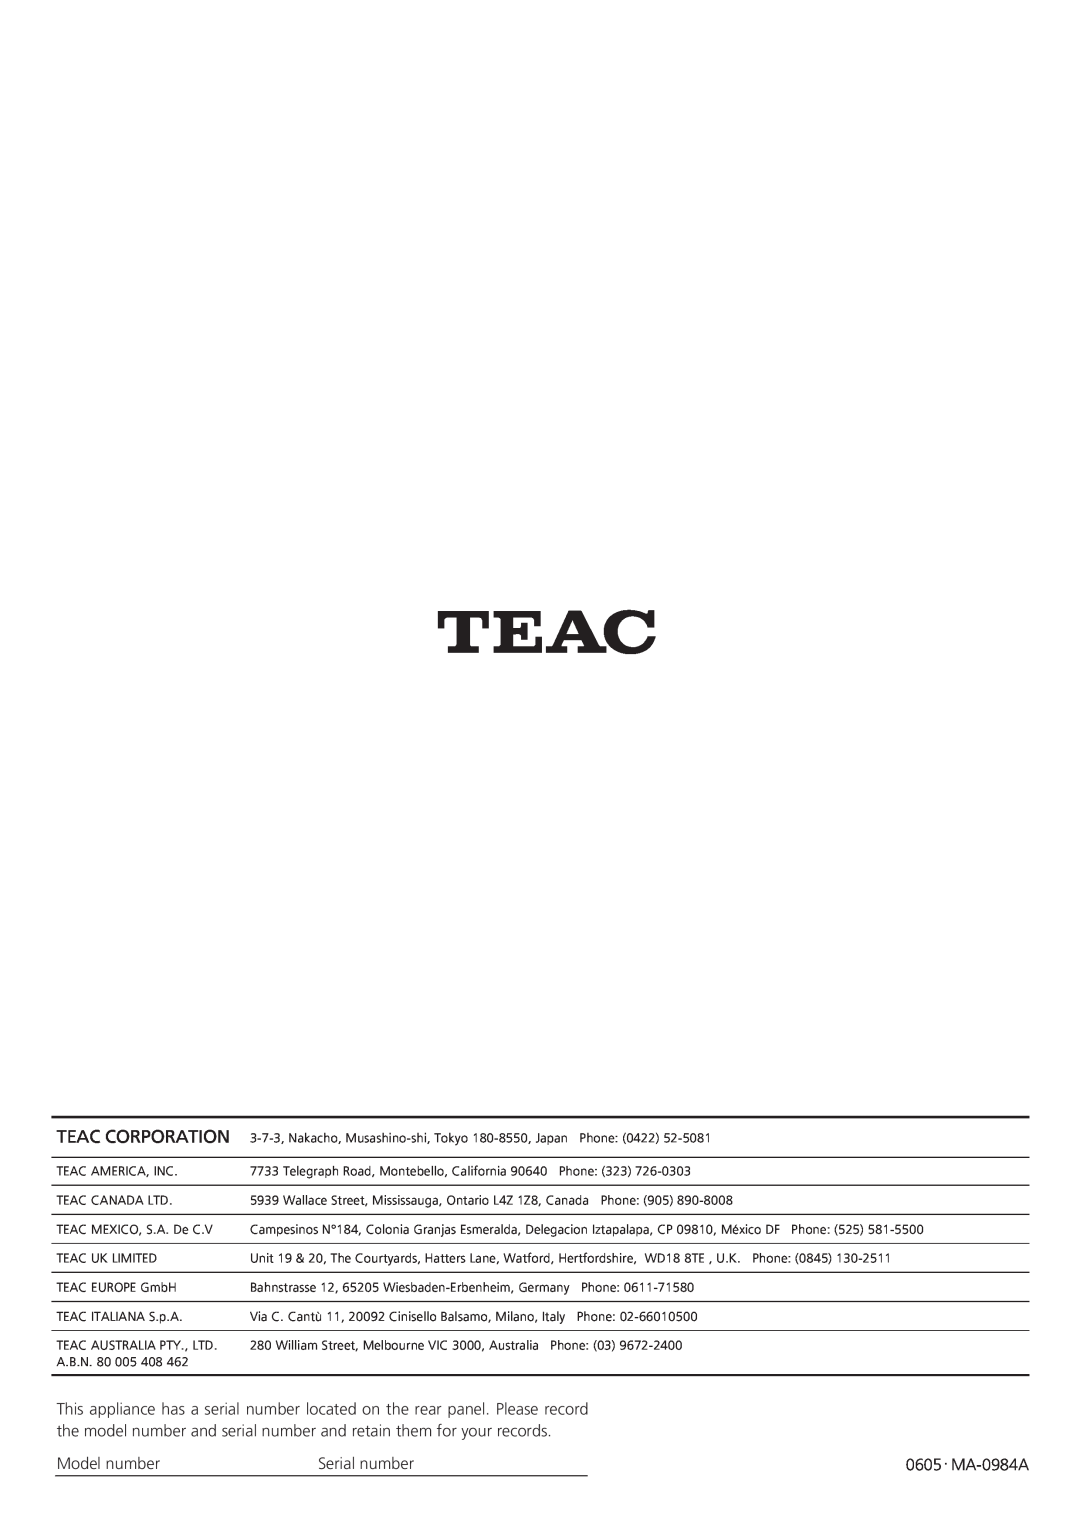 Teac CD-X9 owner manual Teac Corporation, Model number, Serial number, MA-0984A 